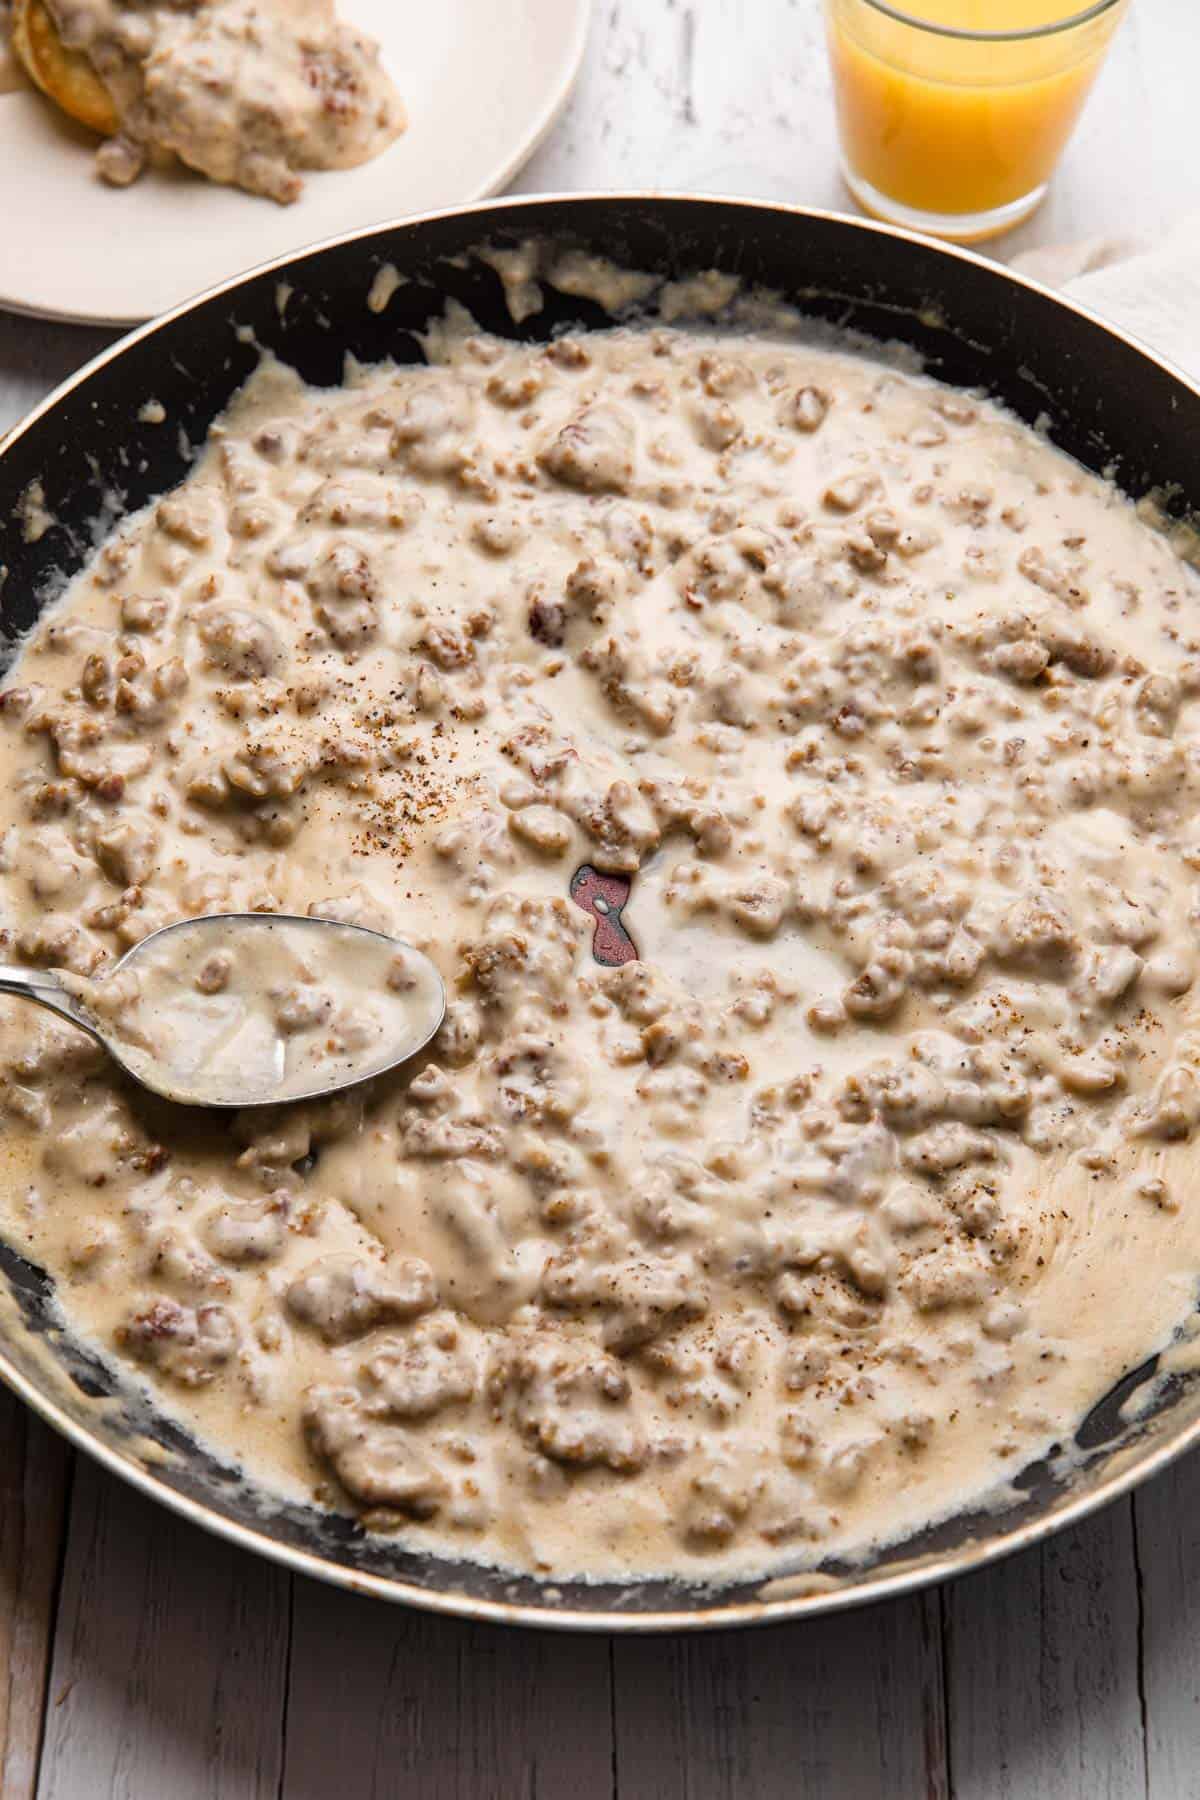 the completed sausage gravy ready to serve